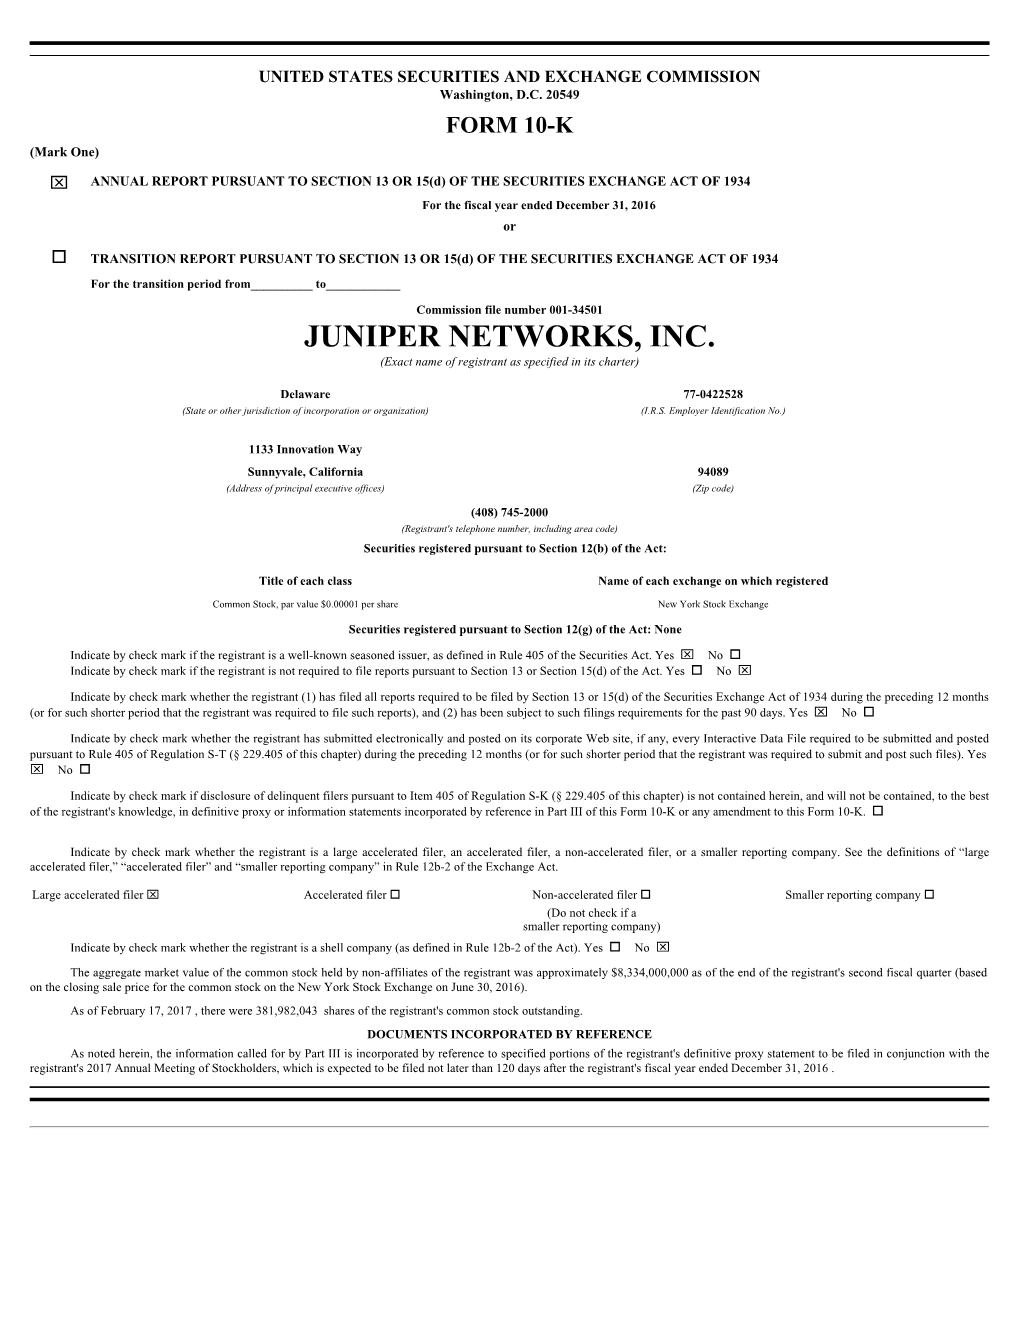 JUNIPER NETWORKS, INC. (Exact Name of Registrant As Specified in Its Charter)